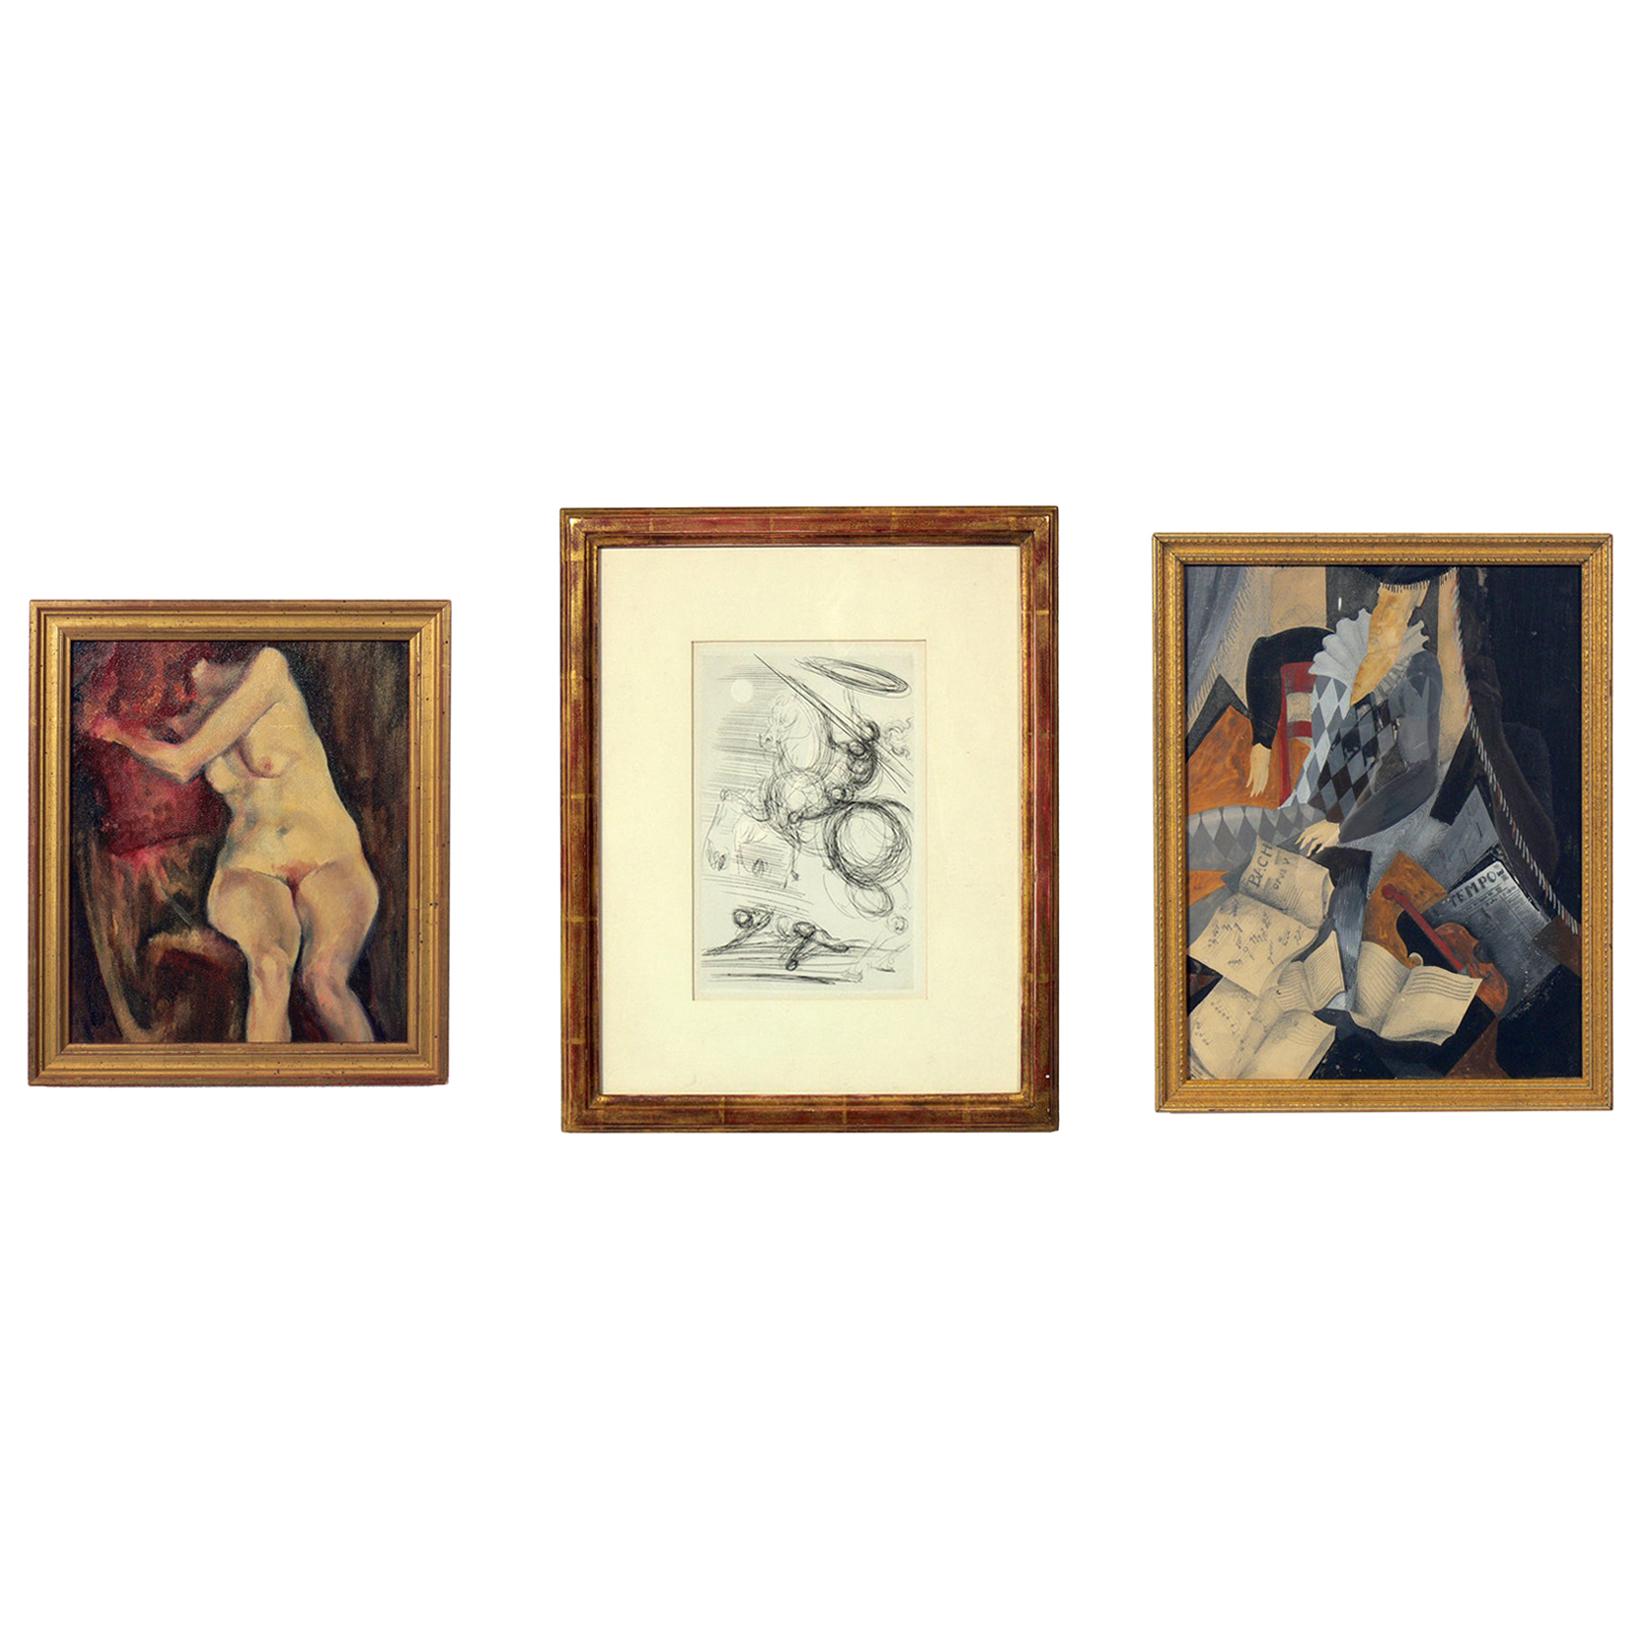 Selection of Modernist Art or Gallery Wall